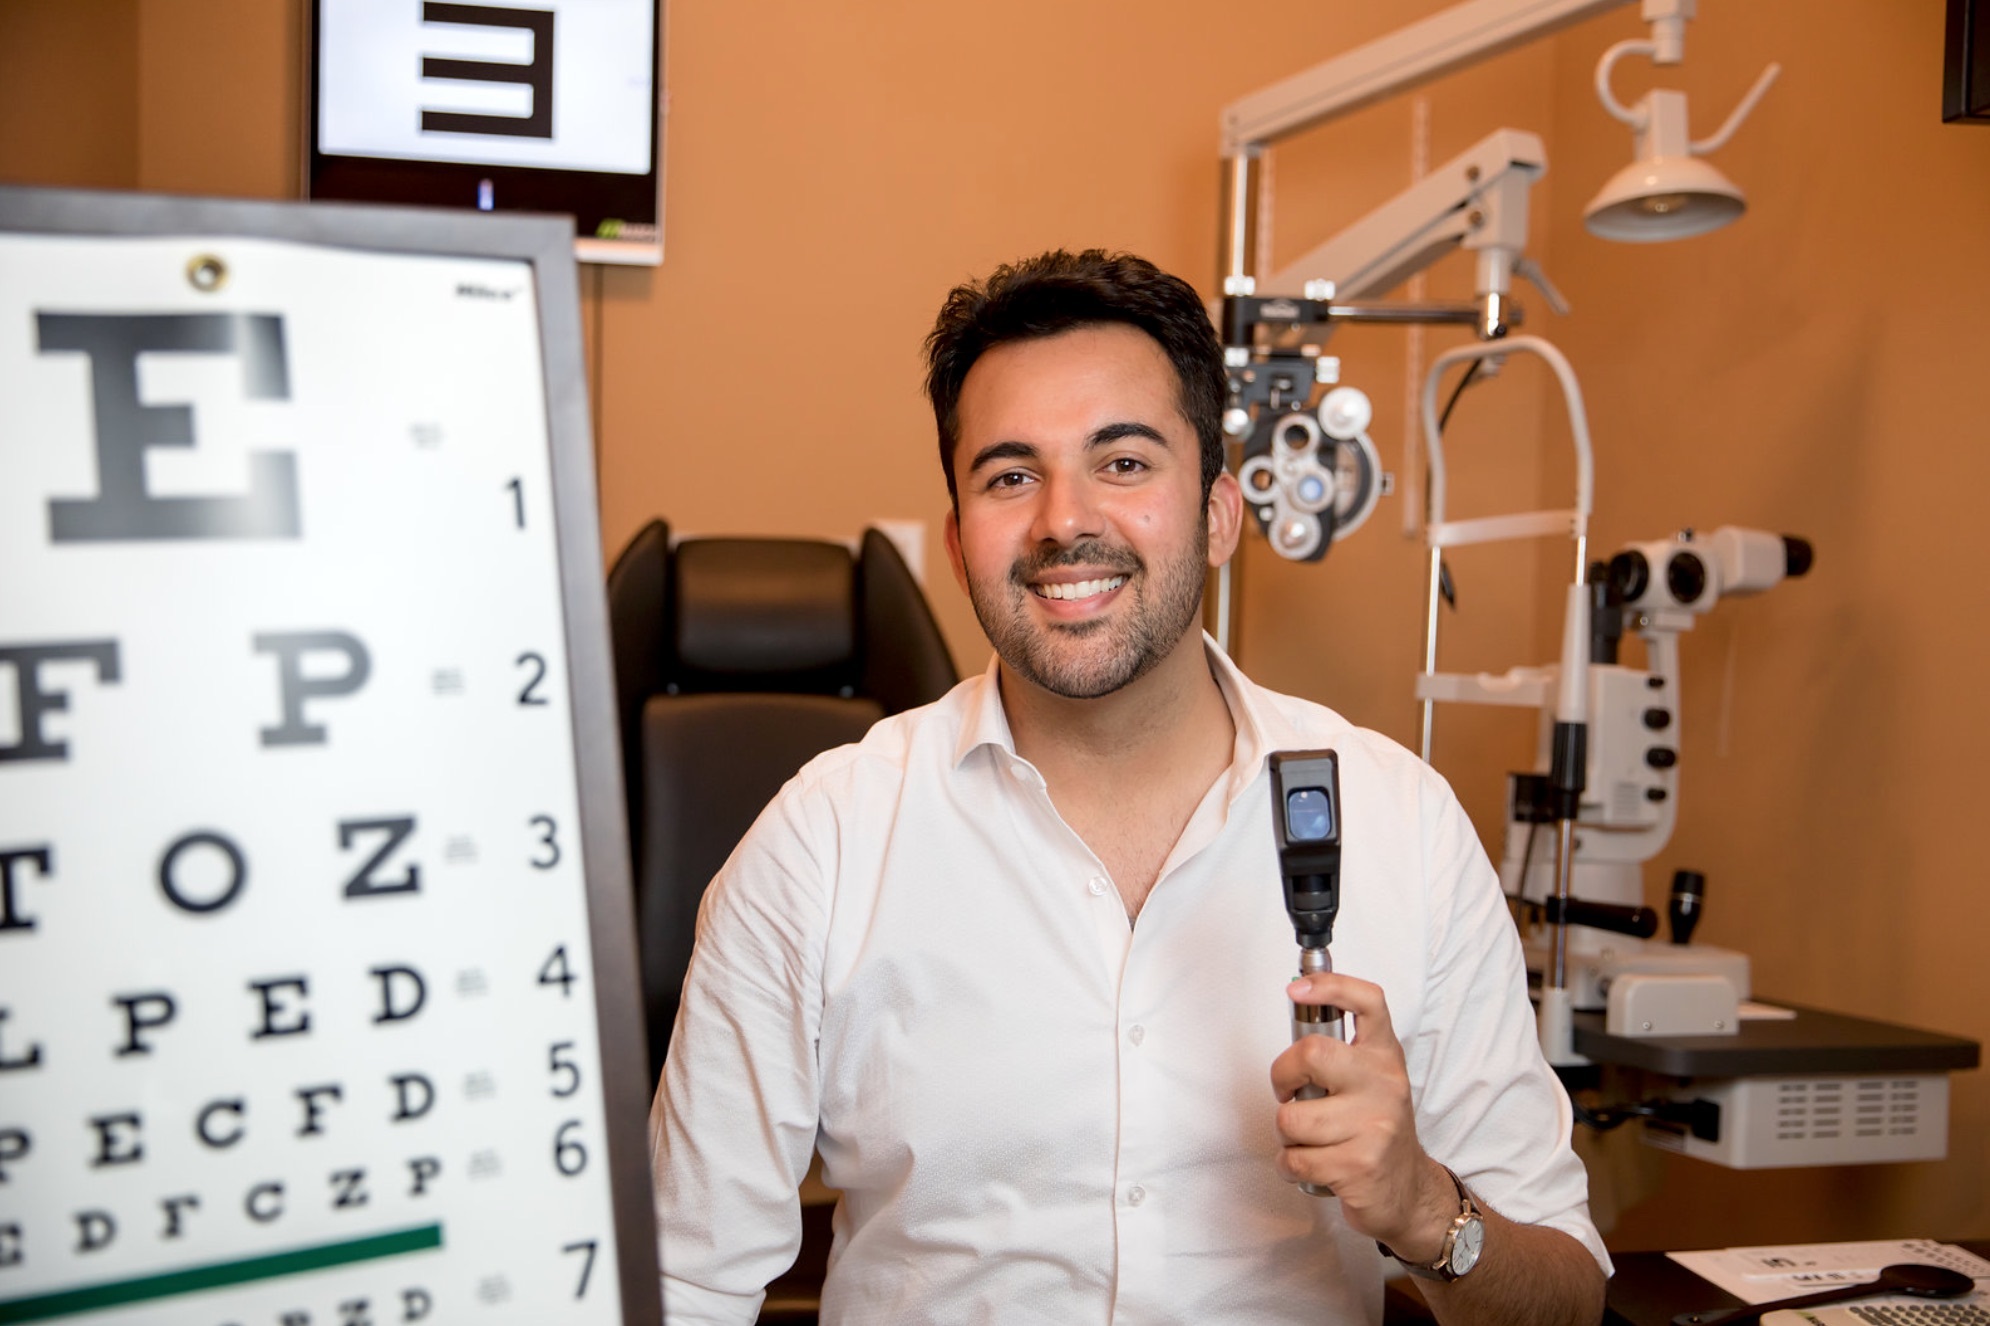 Surrey optometrist – Your One Stop Shop For All Your Optometry Needs